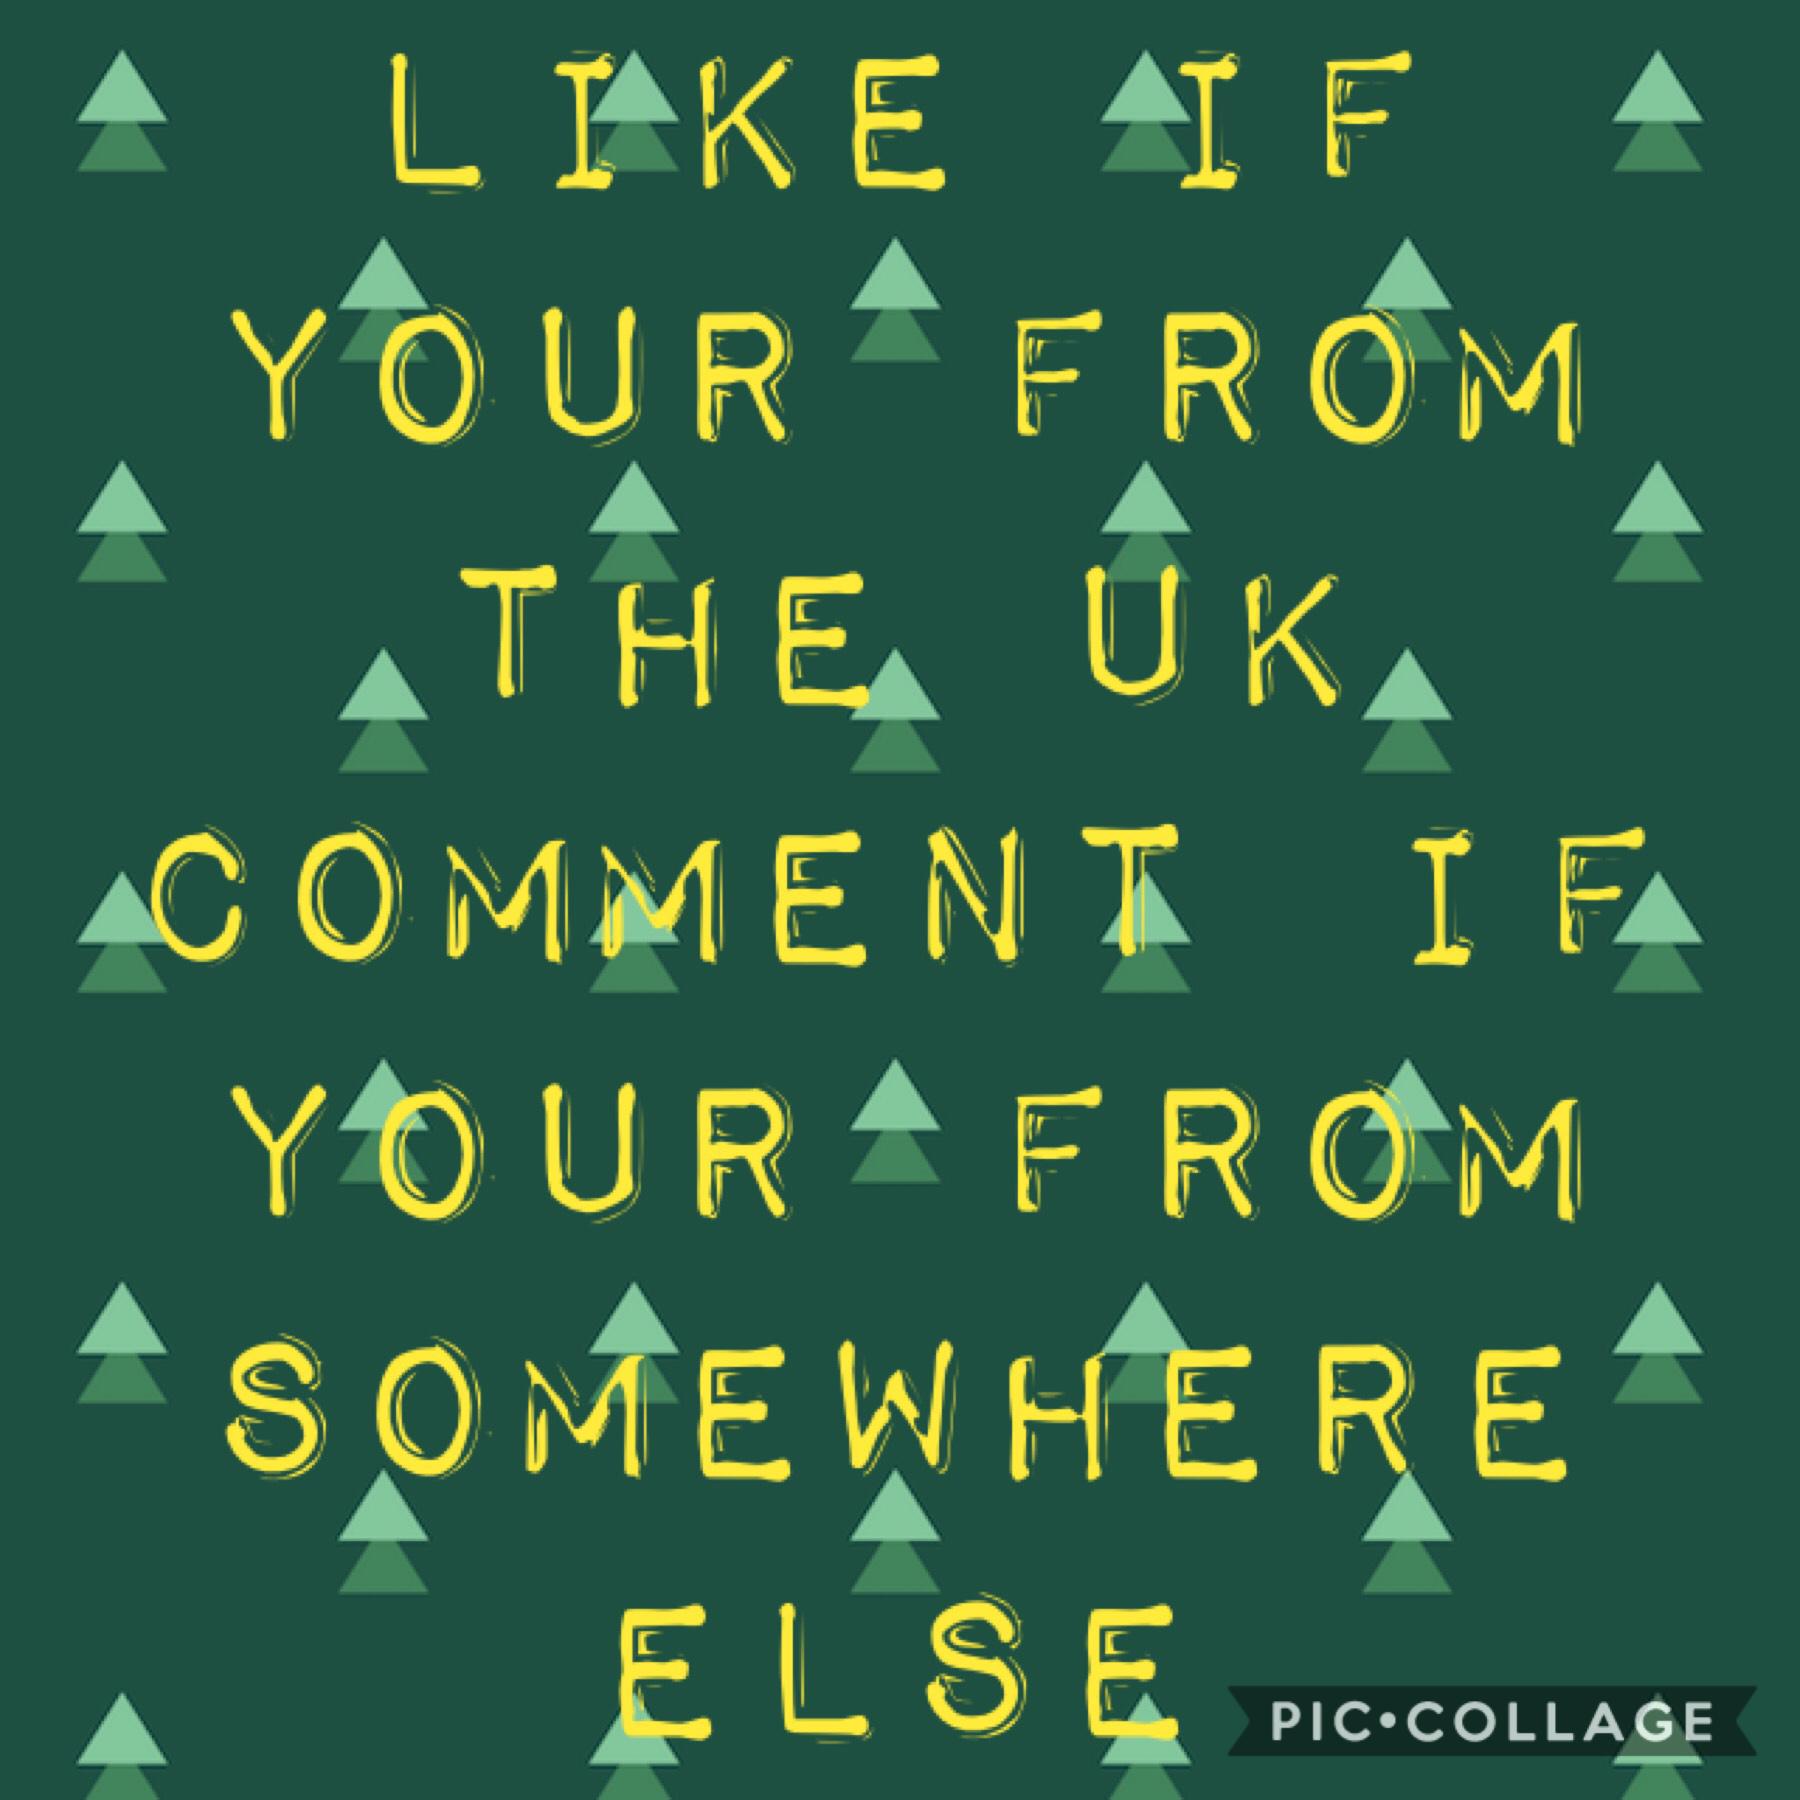 ❤️ I liked cause I’m from the uk❤️